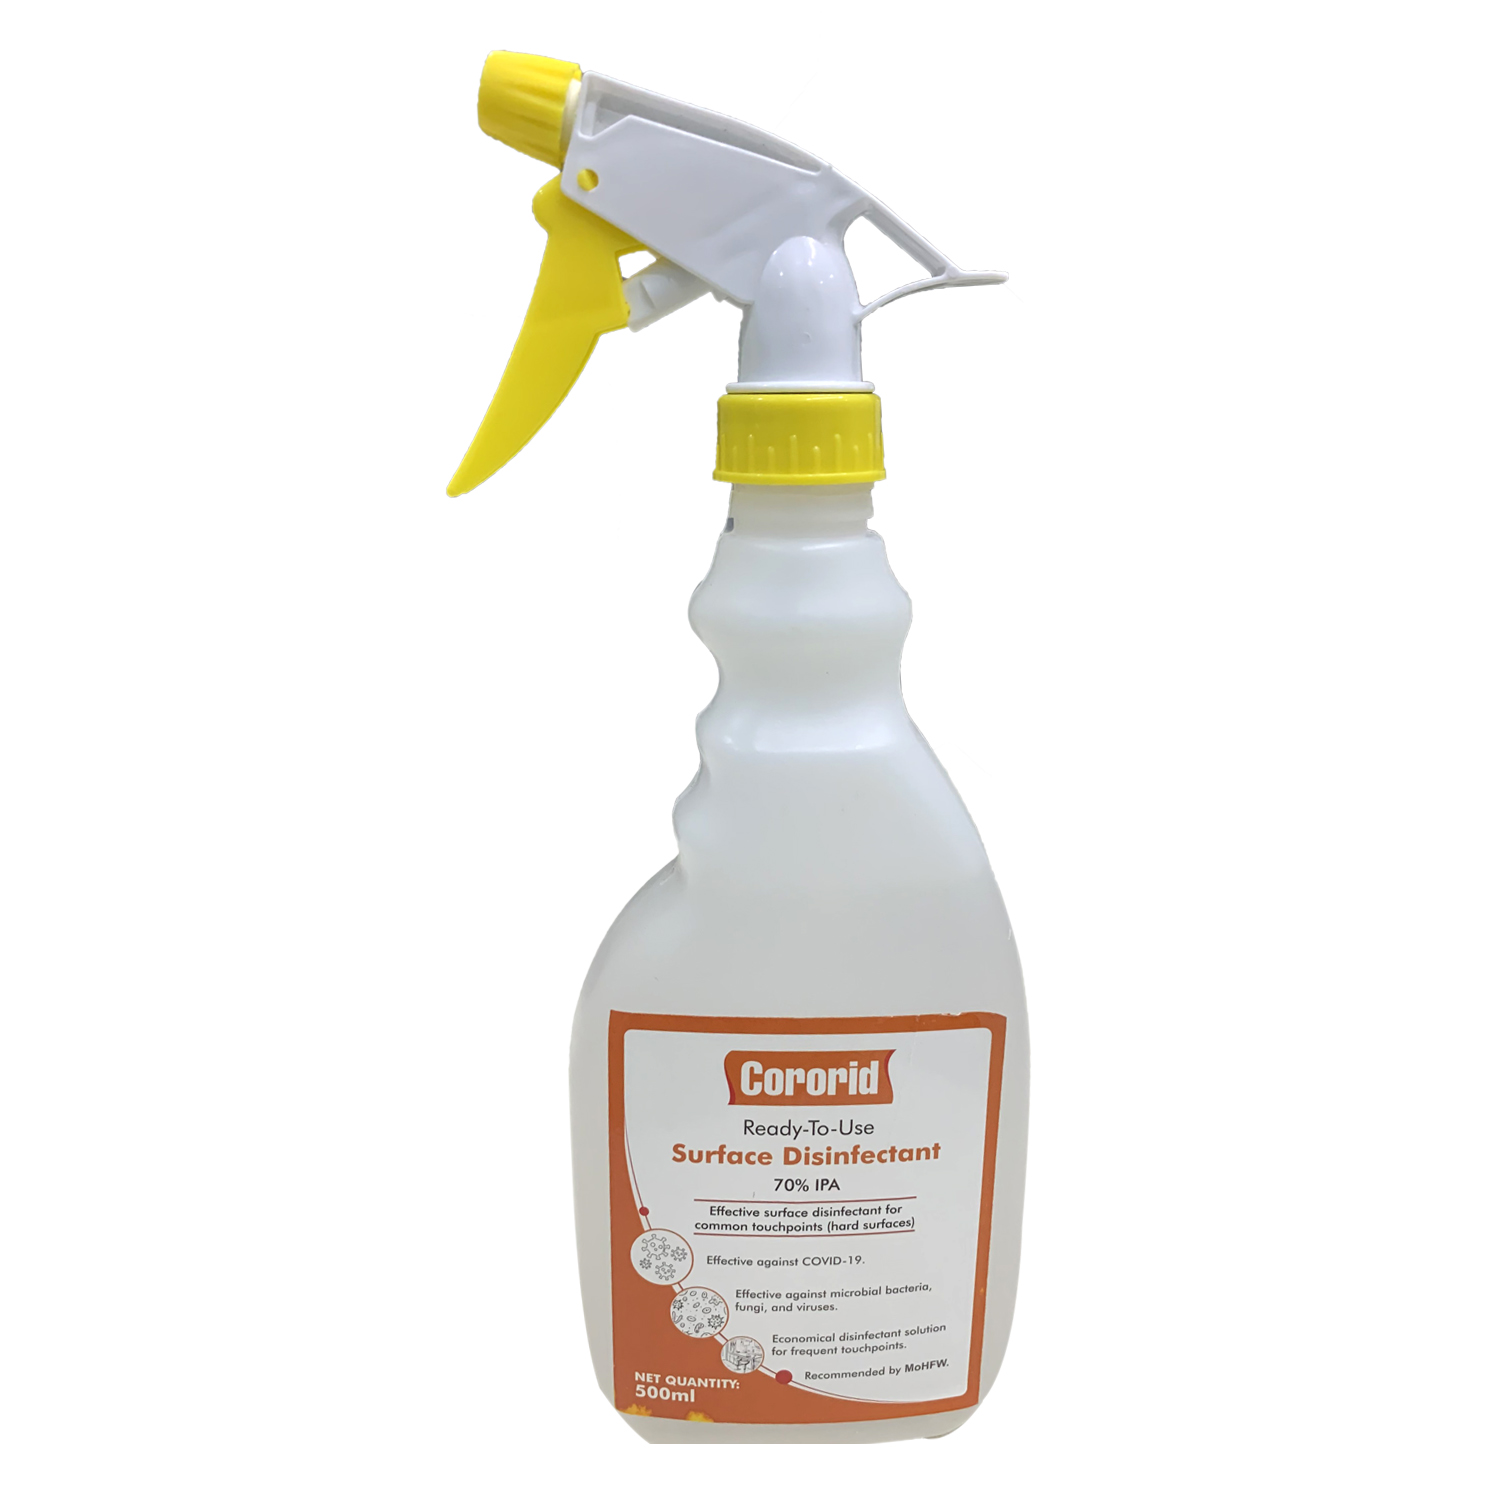 Ready to use Surface Disinfectant (70% IPA) Trigger Pump bottle 500ml, 2042